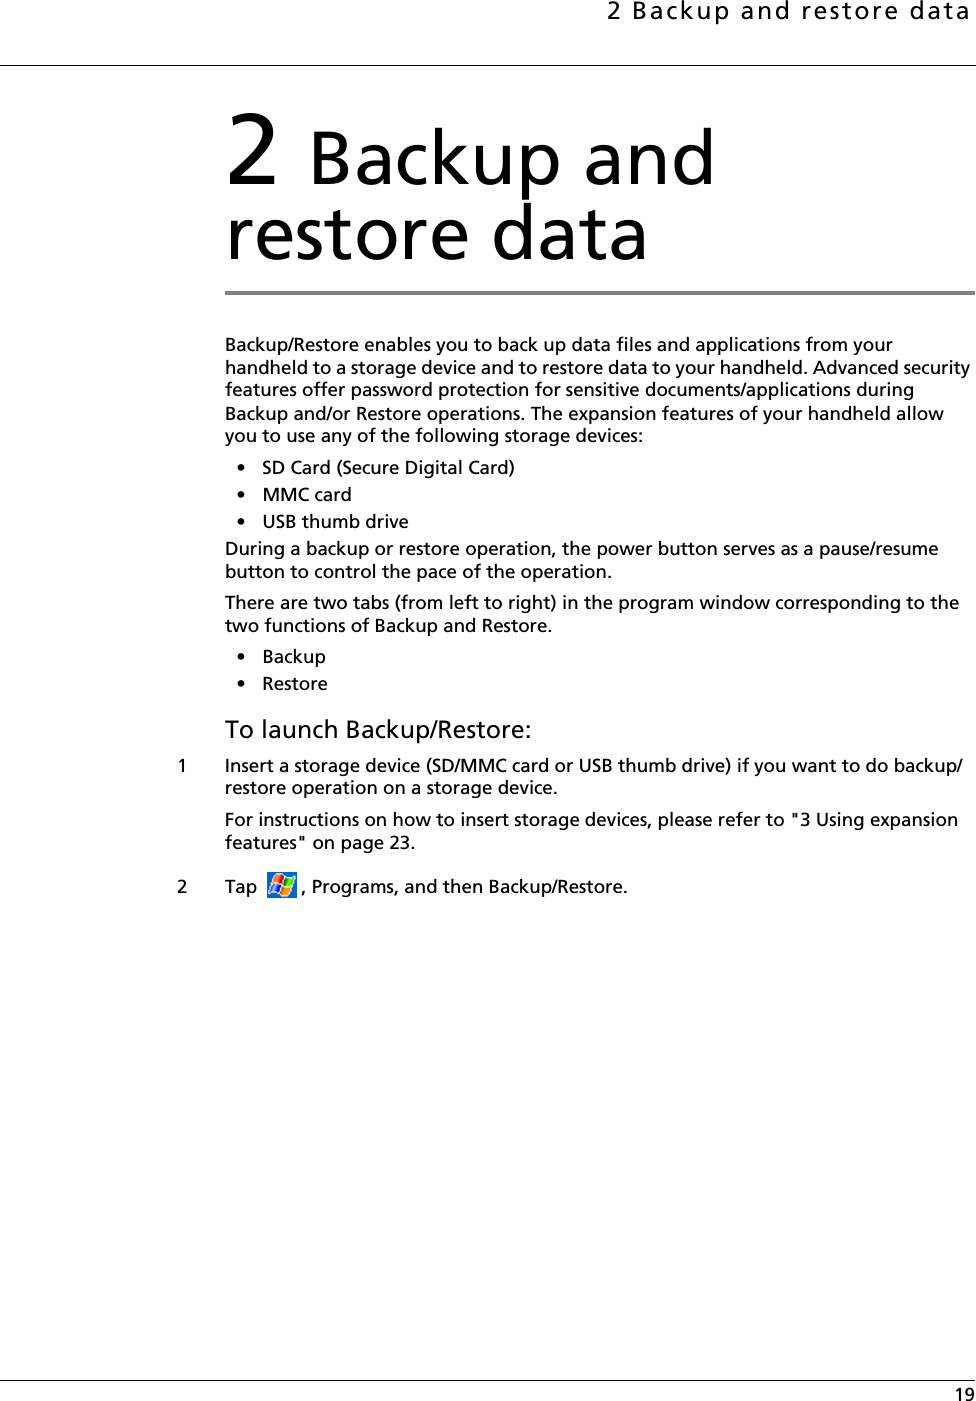 2 Backup and restore data 192 Backup and restore dataBackup/Restore enables you to back up data files and applications from your handheld to a storage device and to restore data to your handheld. Advanced security features offer password protection for sensitive documents/applications during Backup and/or Restore operations. The expansion features of your handheld allow you to use any of the following storage devices: • SD Card (Secure Digital Card) •MMC card• USB thumb driveDuring a backup or restore operation, the power button serves as a pause/resume button to control the pace of the operation.There are two tabs (from left to right) in the program window corresponding to the two functions of Backup and Restore.• Backup• RestoreTo launch Backup/Restore:1 Insert a storage device (SD/MMC card or USB thumb drive) if you want to do backup/restore operation on a storage device.For instructions on how to insert storage devices, please refer to &quot;3 Using expansion features&quot; on page 23.2 Tap  , Programs, and then Backup/Restore.